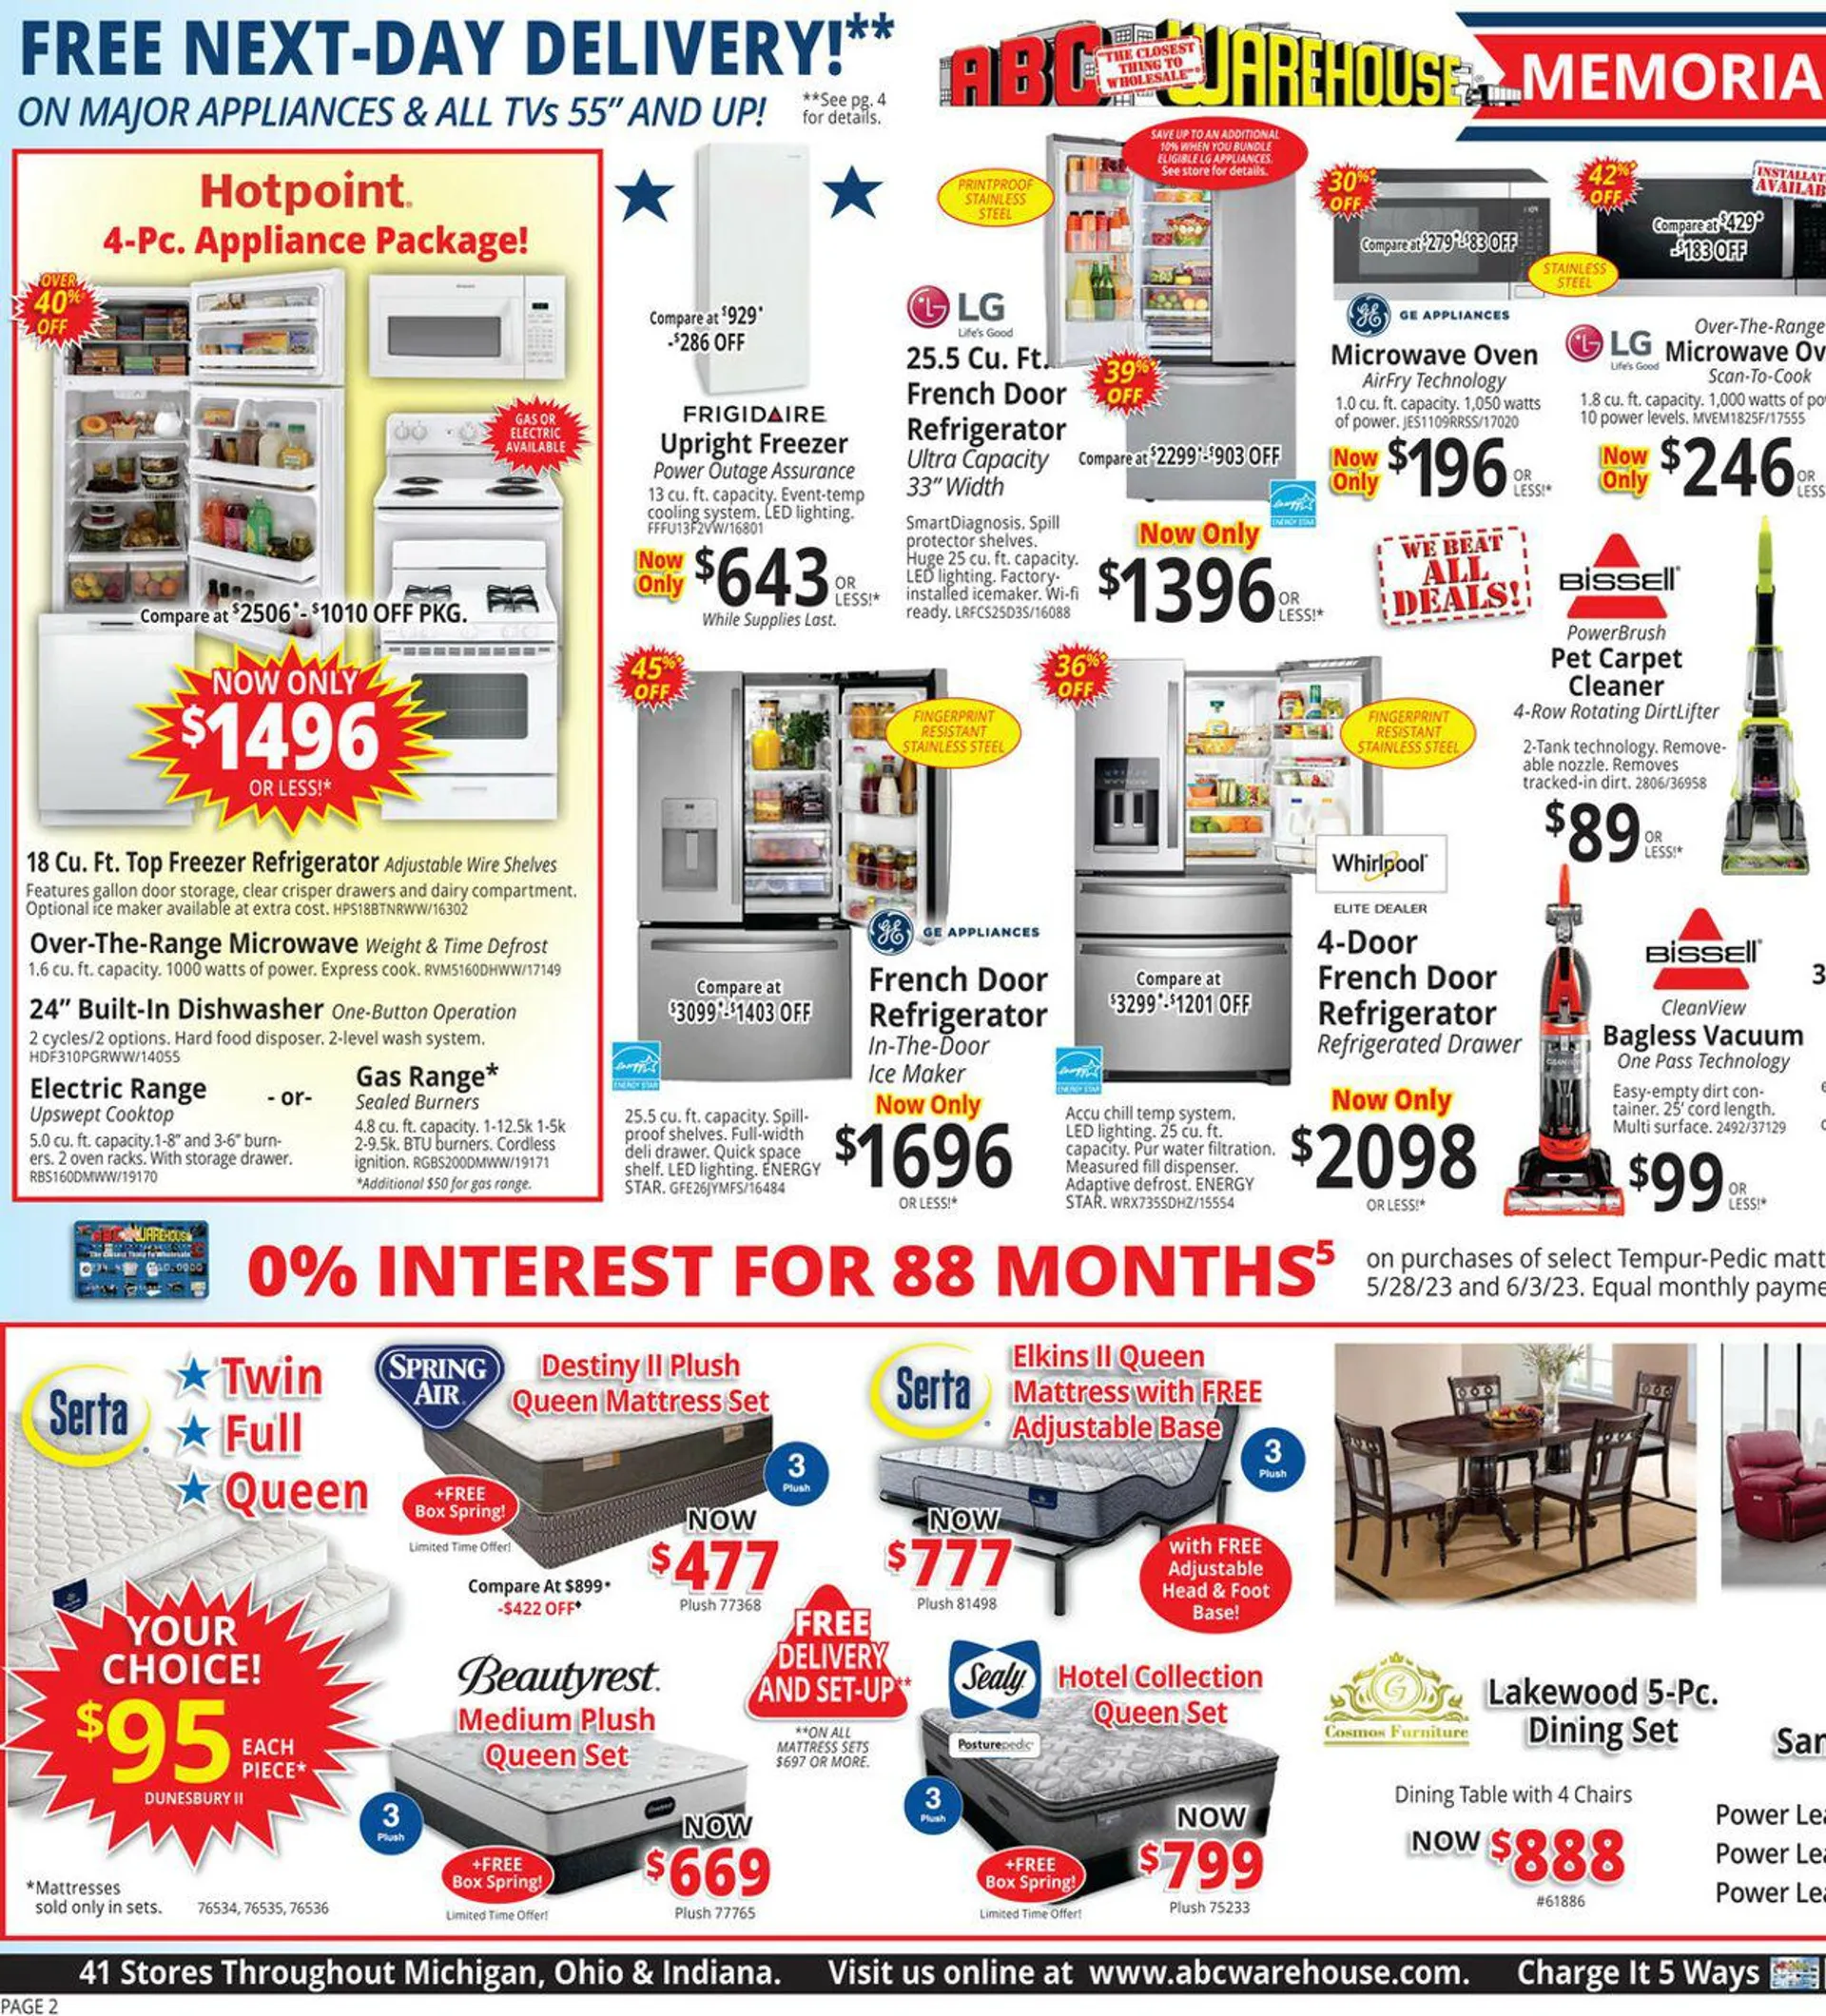 ABC Warehouse Current weekly ad - 2